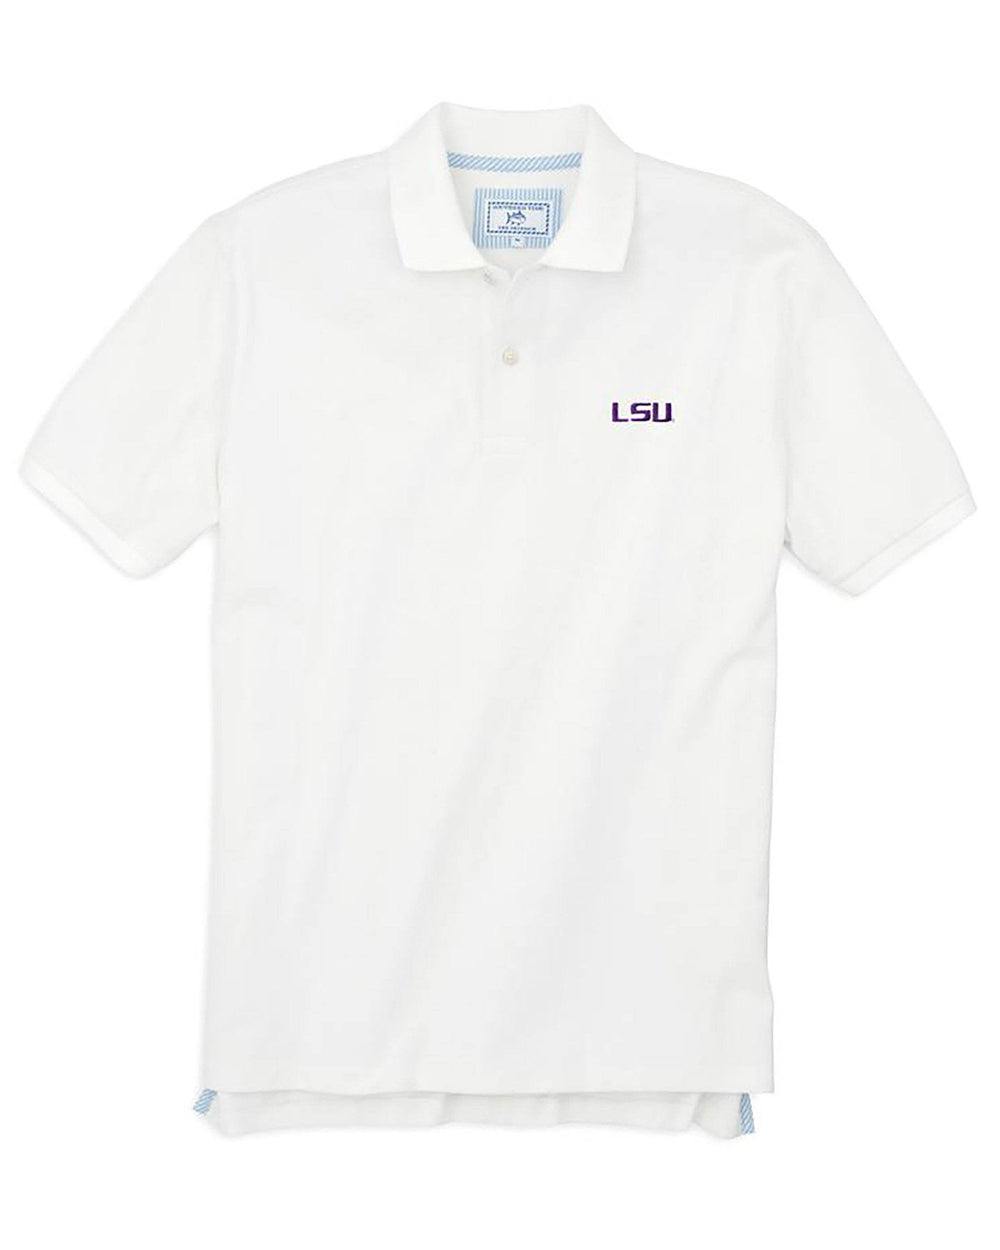 The front view of the Men's White LSU Tigers Pique Polo Shirt by Southern Tide - Classic White